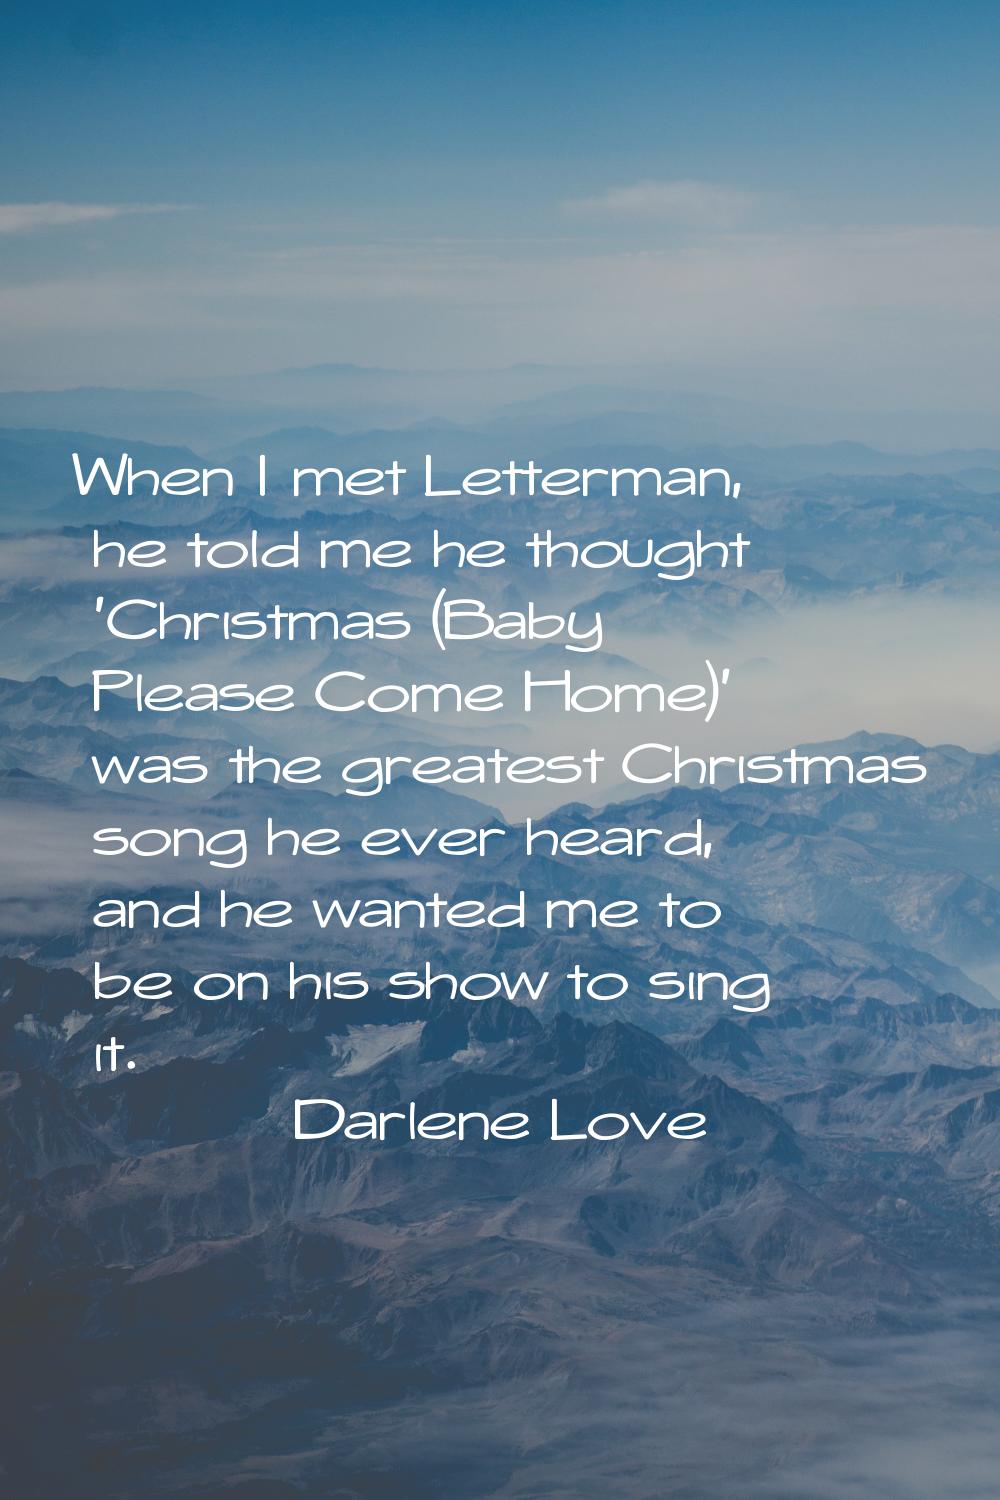 When I met Letterman, he told me he thought 'Christmas (Baby Please Come Home)' was the greatest Ch